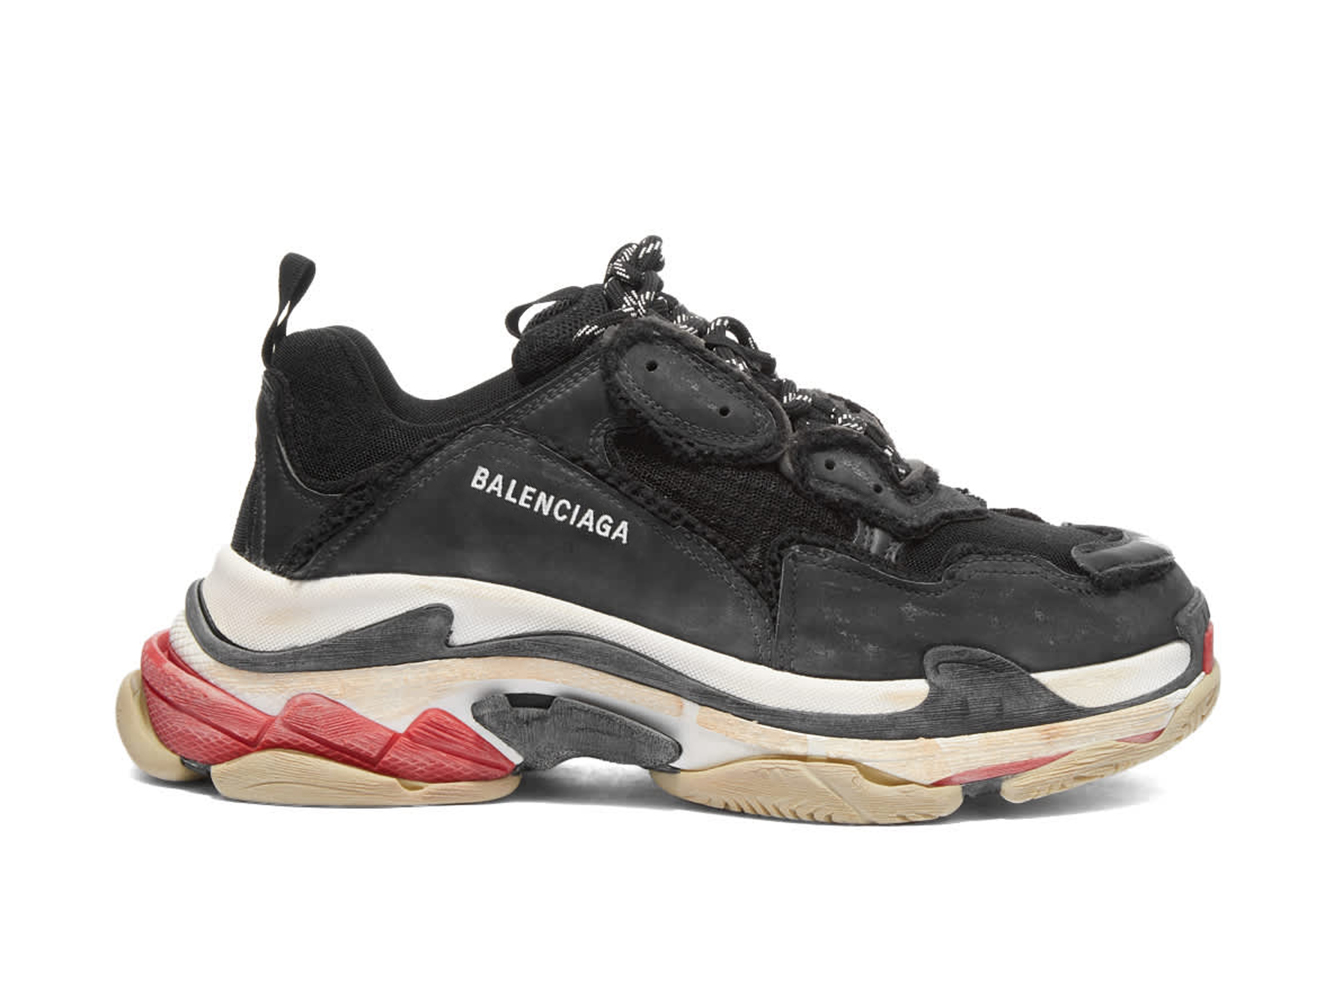 New colors for the Balenciaga Triple S Trainer